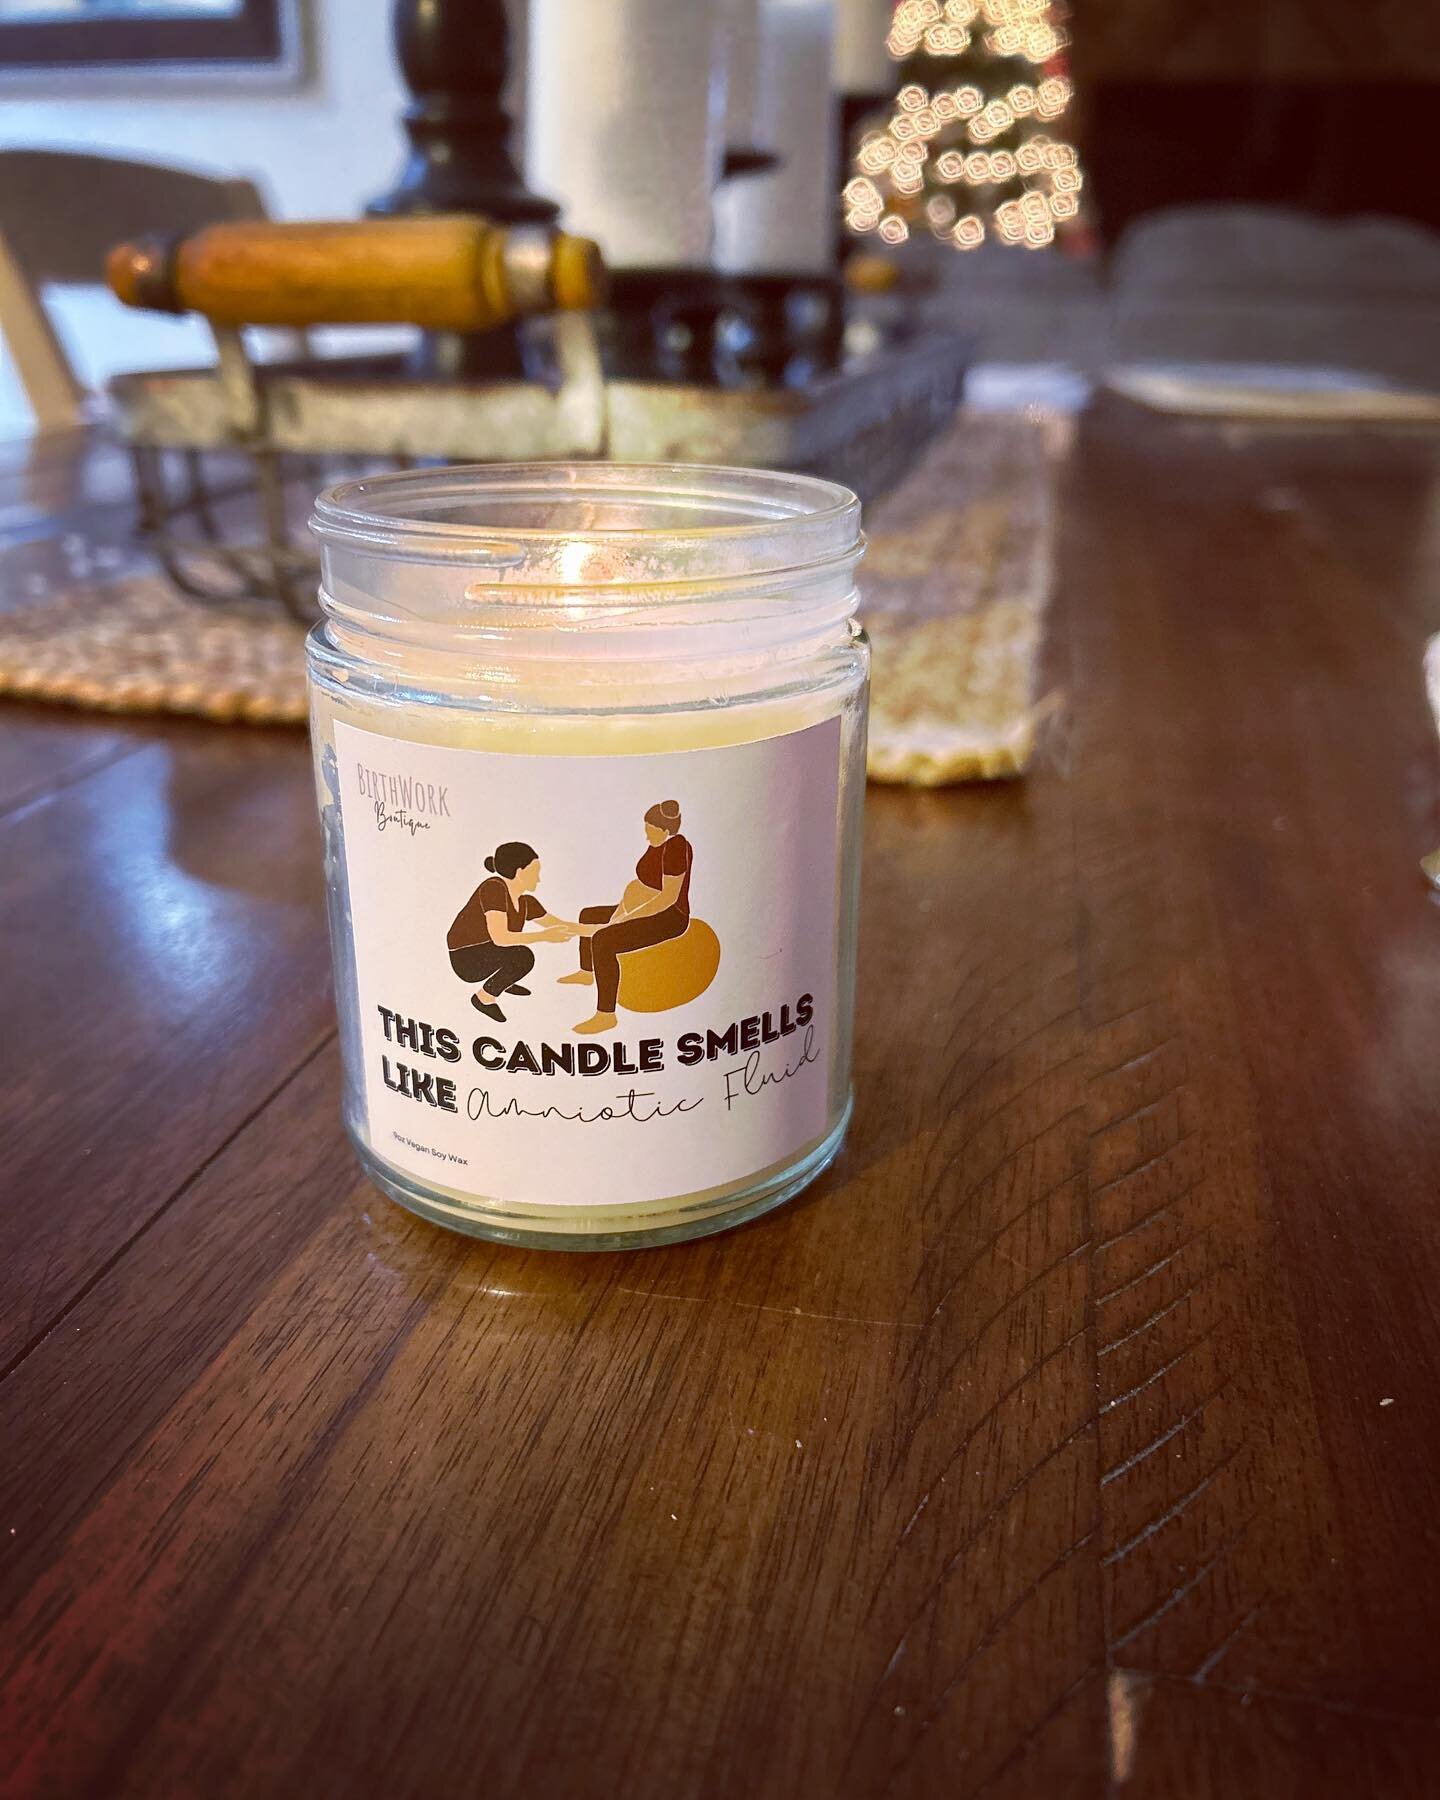 I love this candle! It was a great gift. #midwifegift #murrietamidwife #midwifestudent